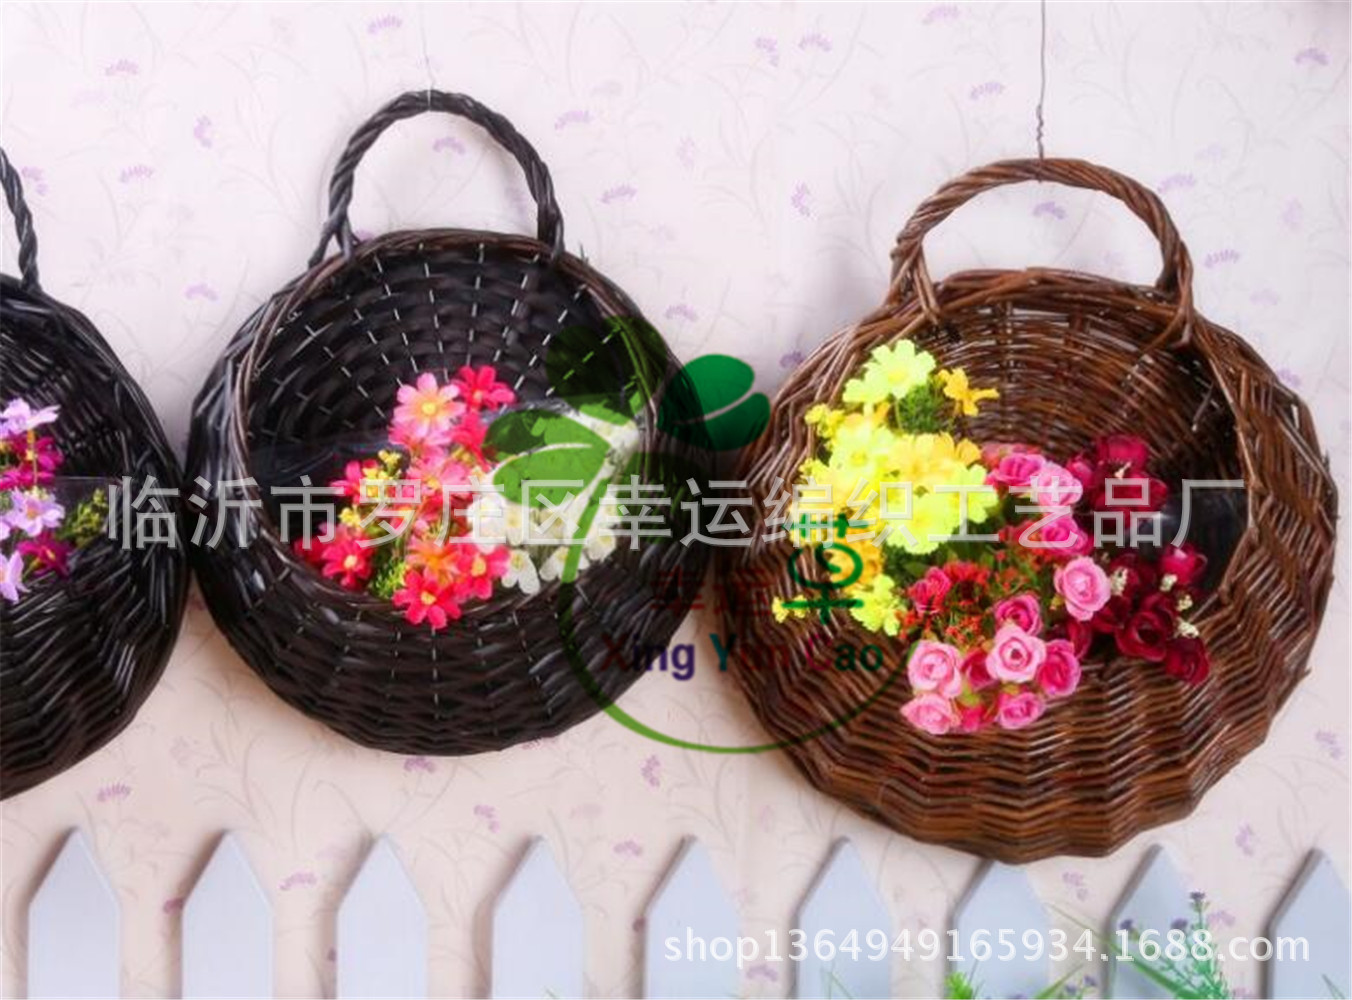 Best Seller in Europe and America Popular Natural Wicker Woven Wicker Braided Ornament Wicker Plant Planting Flower Basket Succulent Flower Pot